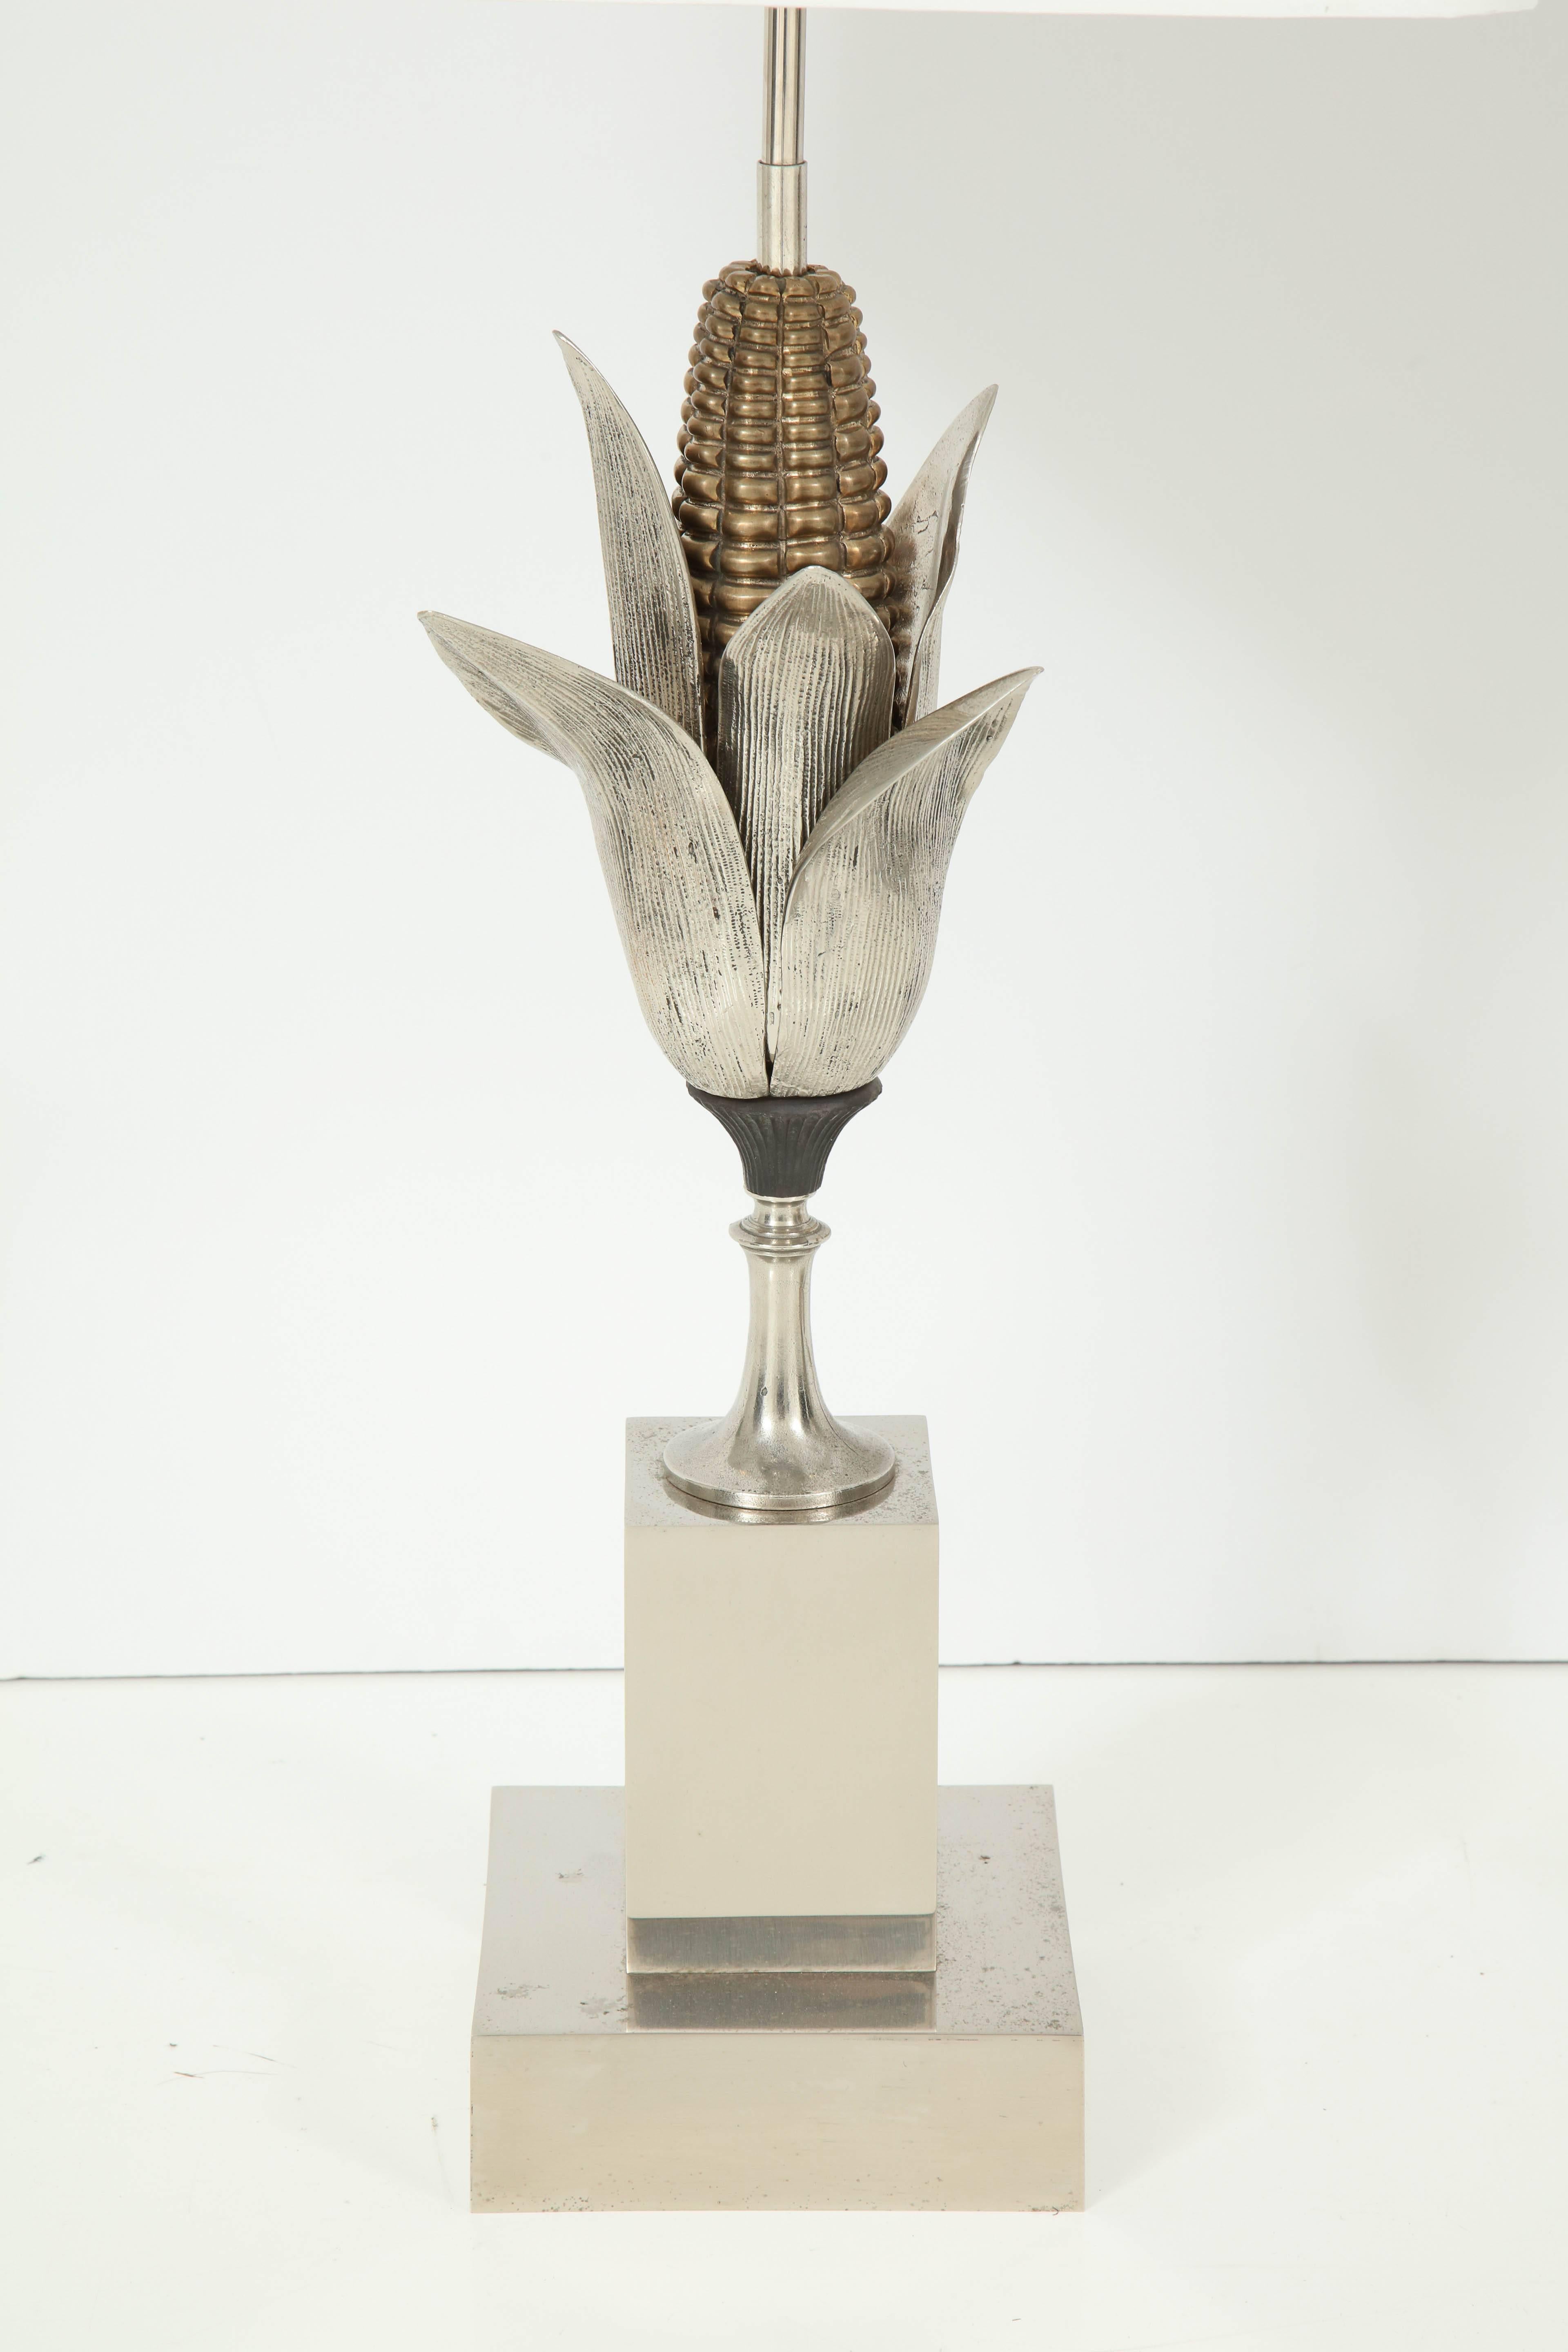 Pair of silver plated bronze corn husks lamps by Maison Charles, the cob itself is patinated bronze for contrast. Rewired.